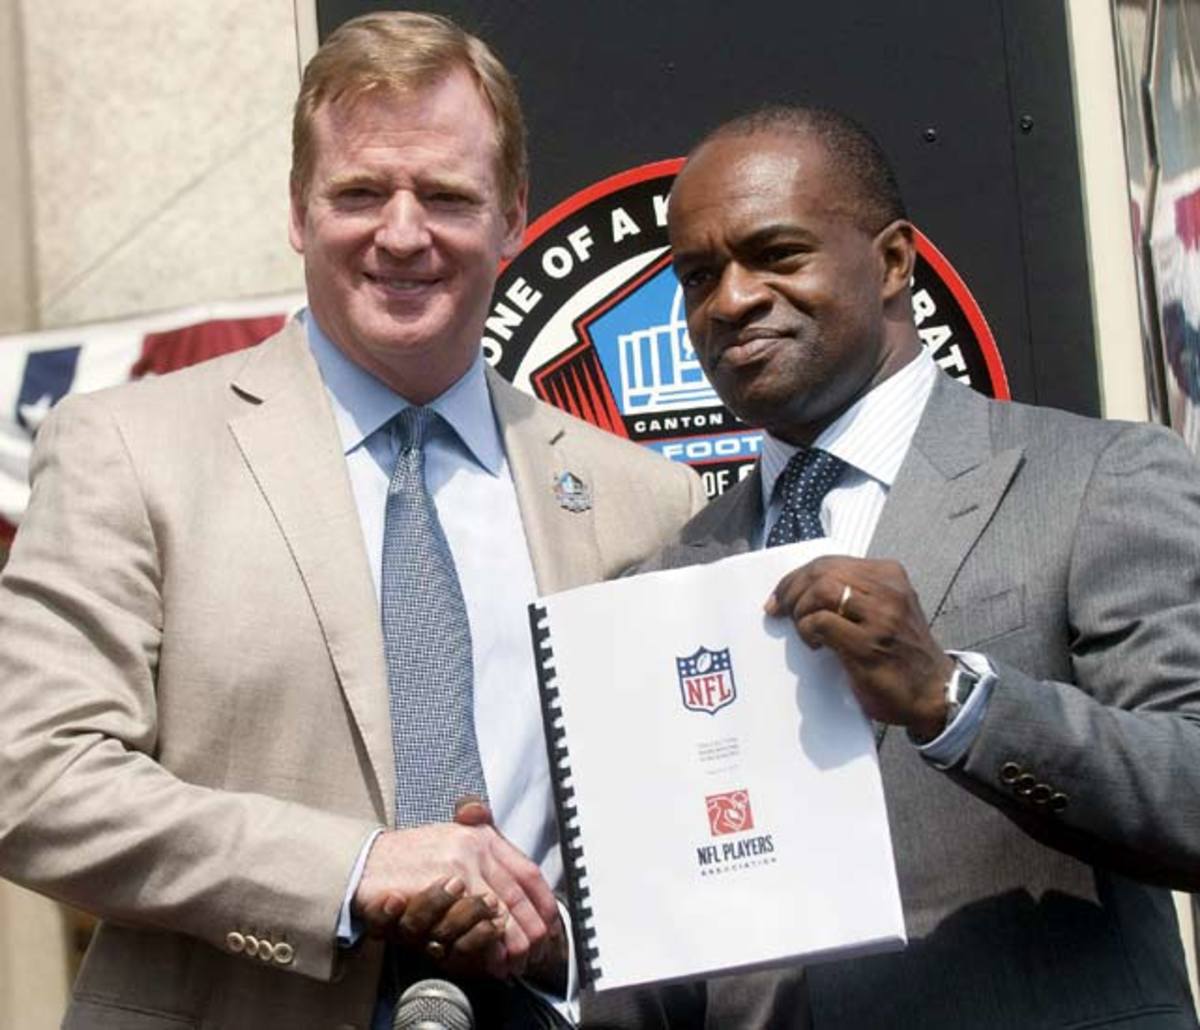 Roger Goodell, DeMaurice Smith